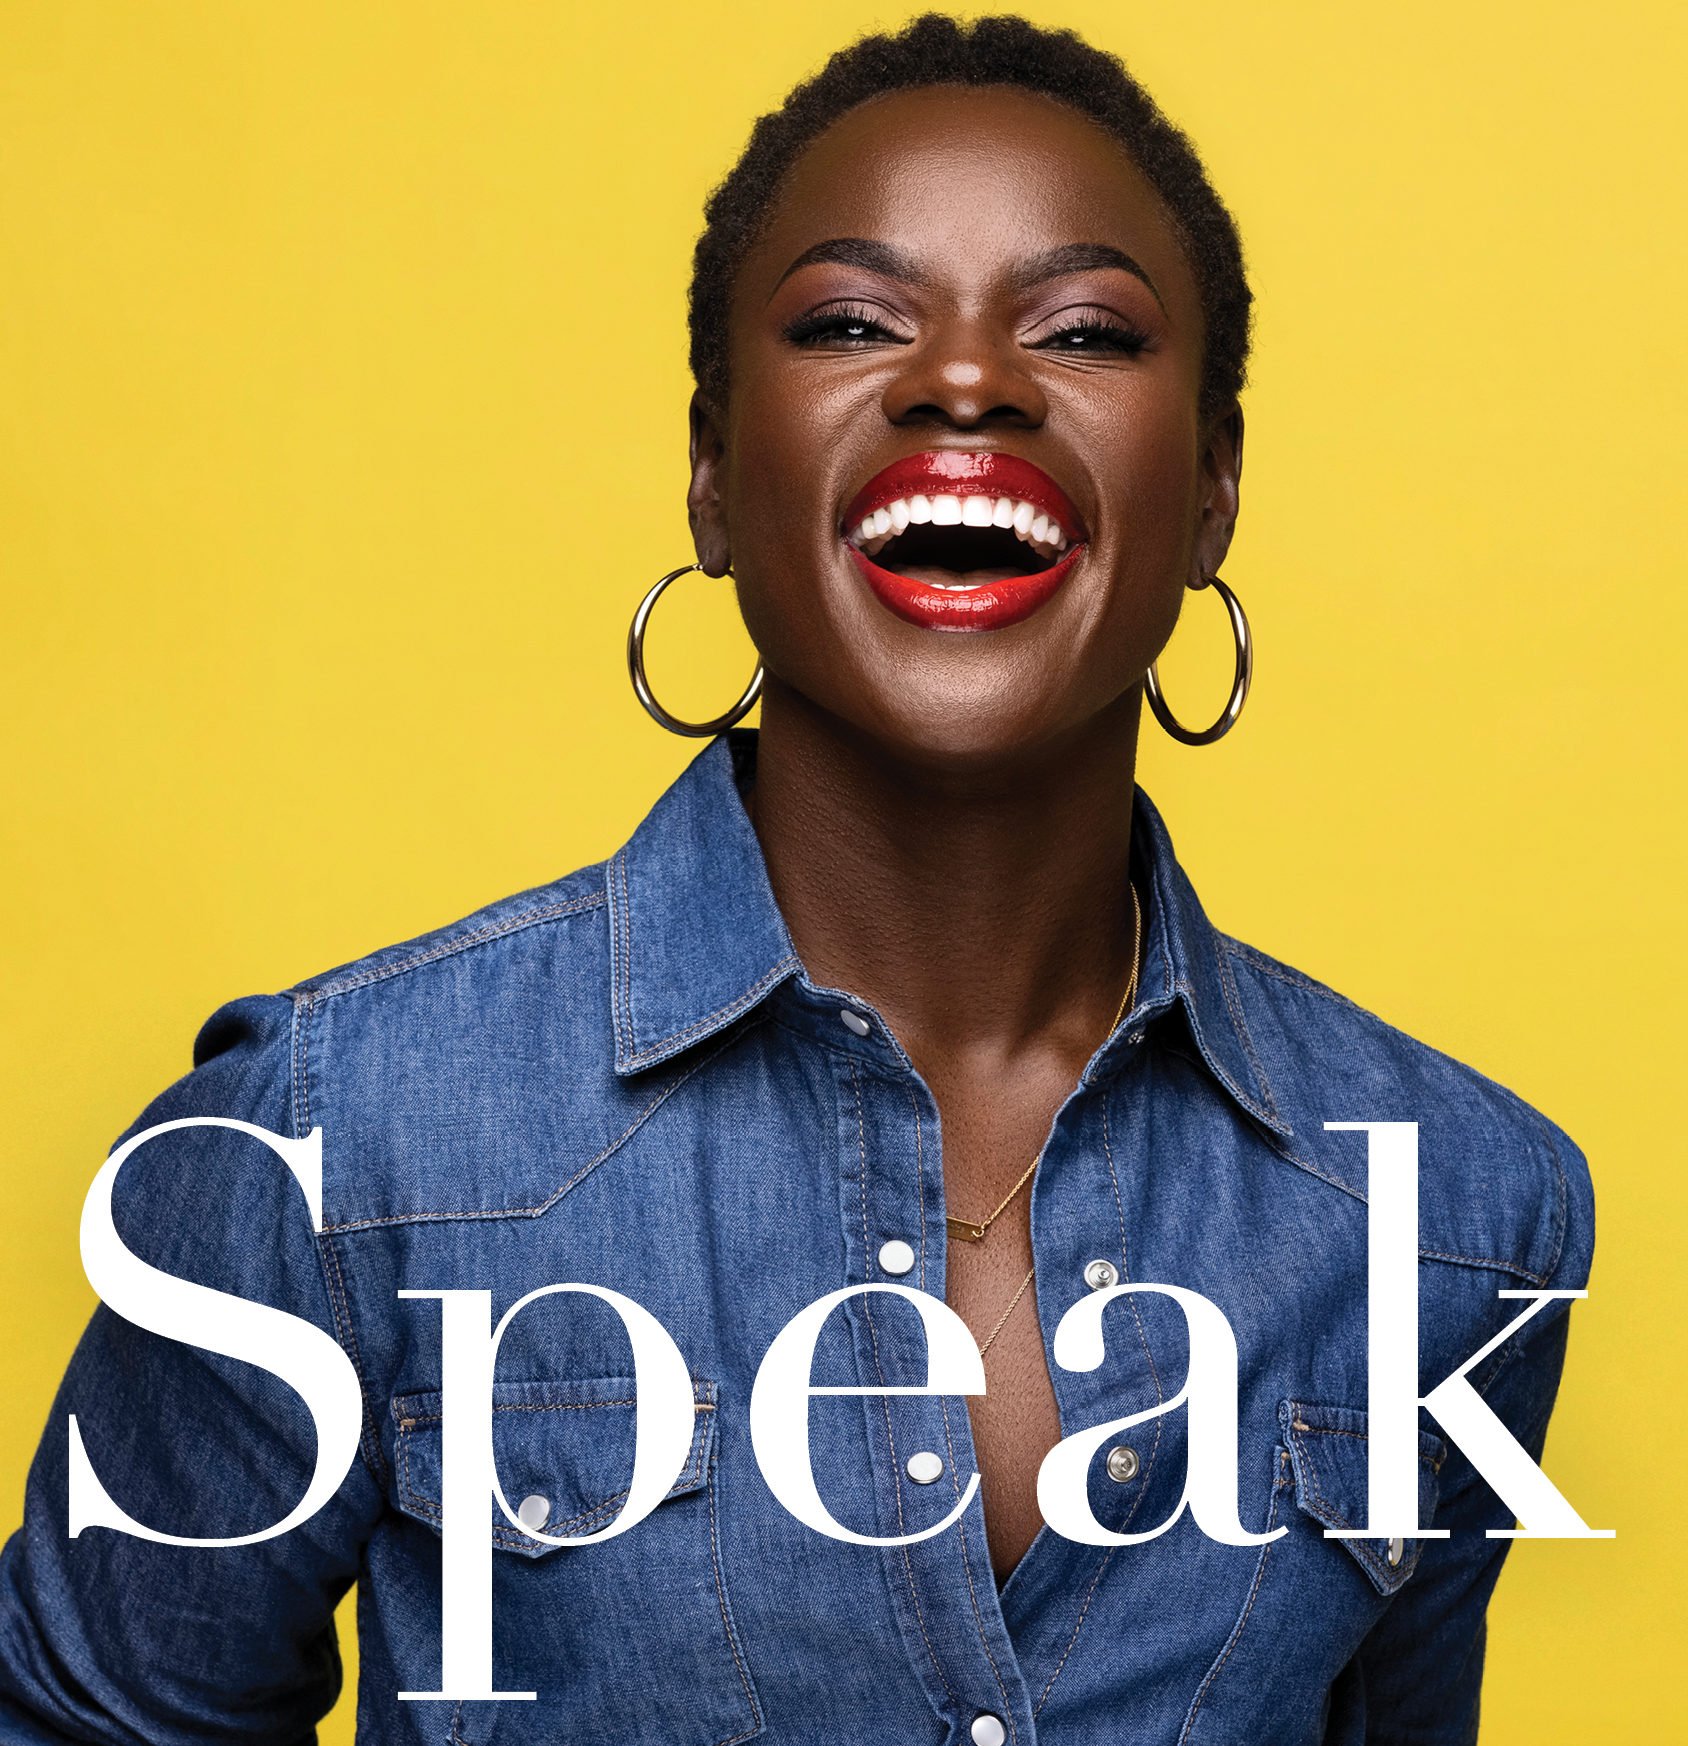 Peloton’s Tunde Oyeneyin on the cover of her book, "Speak"